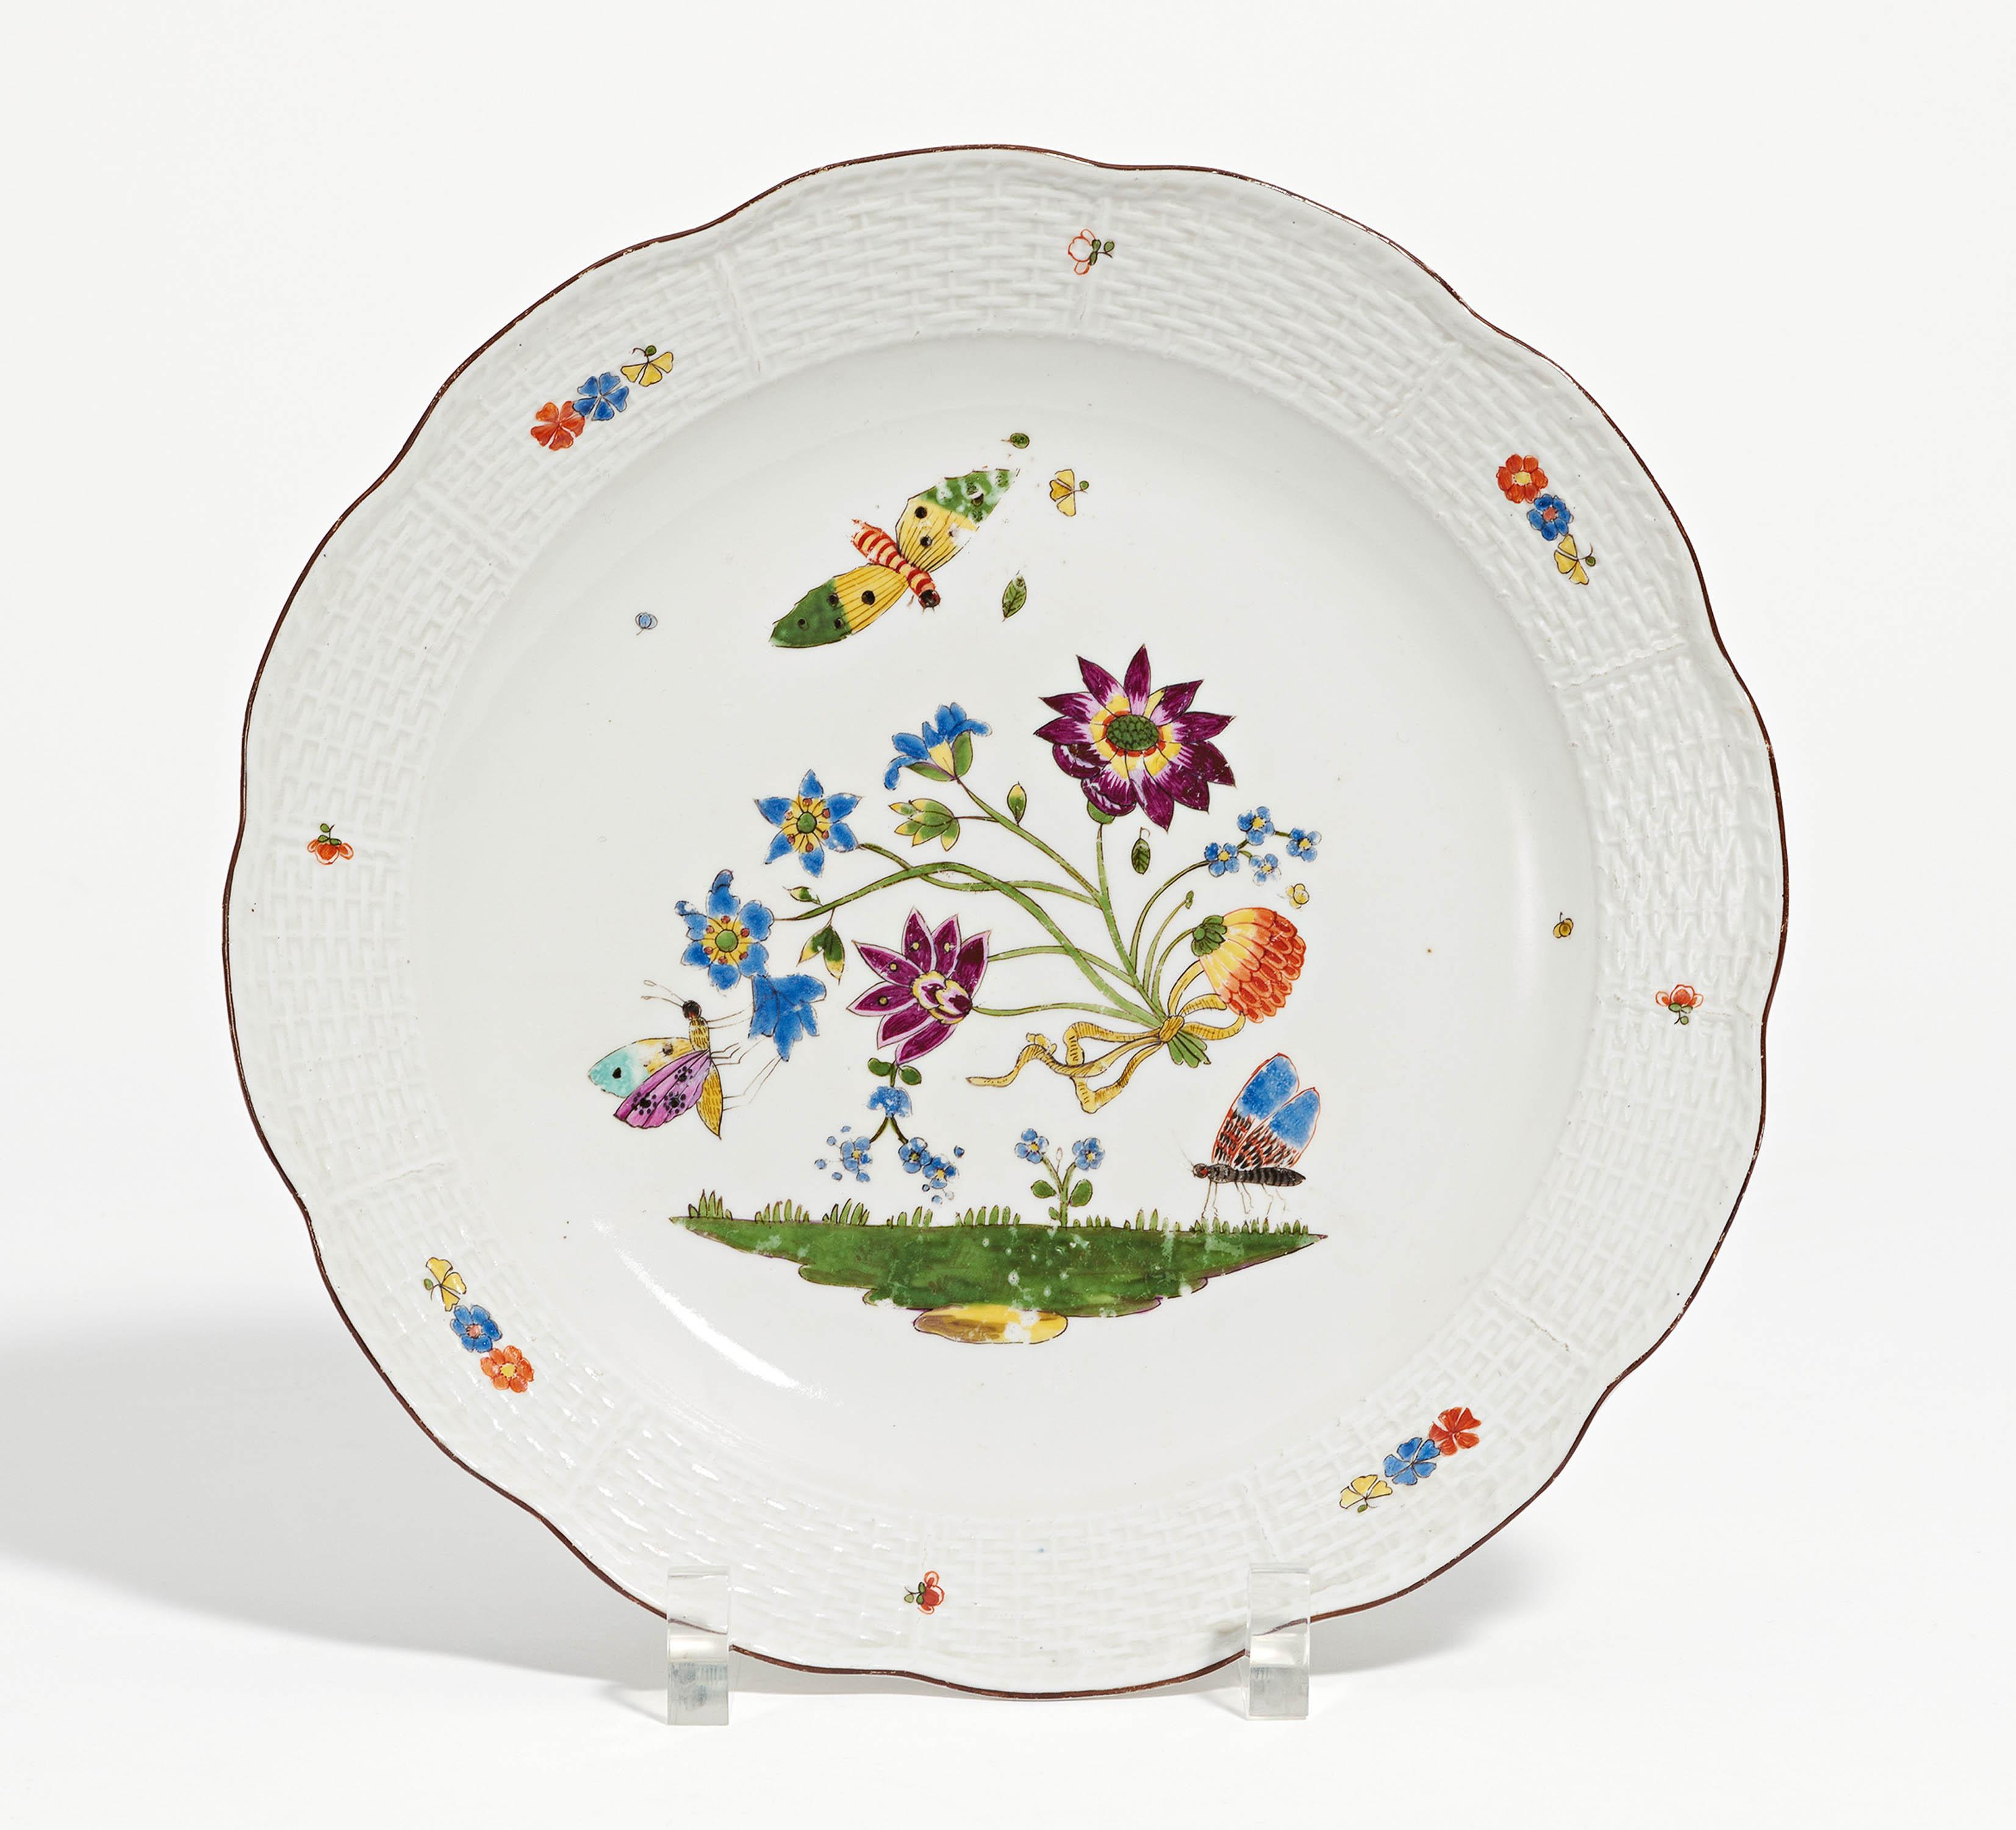 Plate with "Bee pattern"